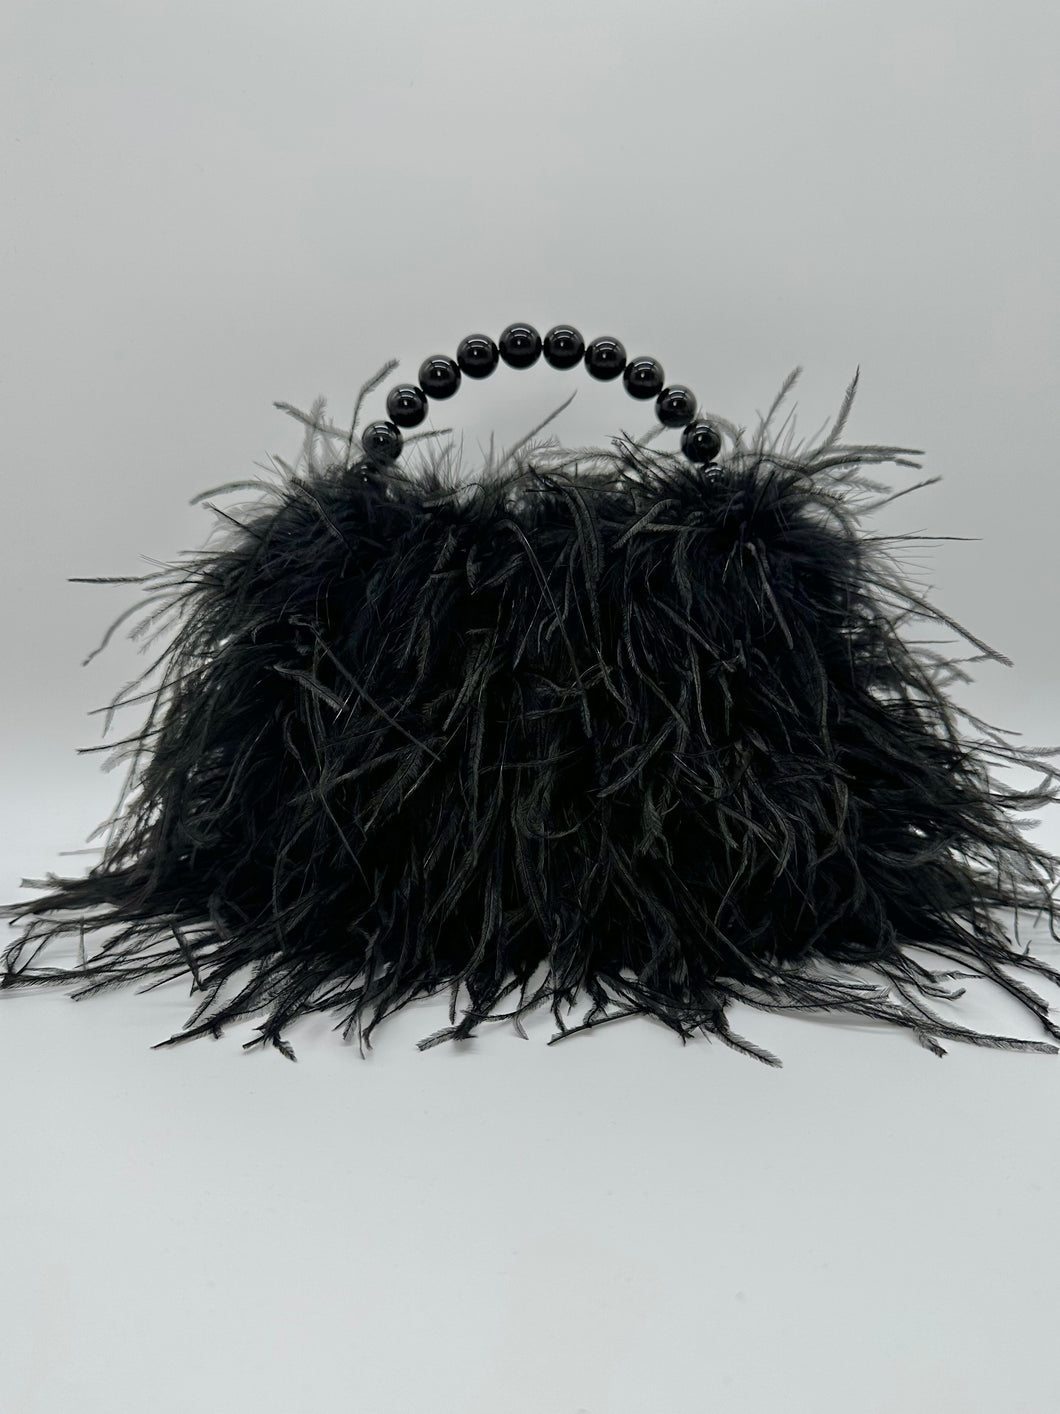 Black Ostrich Feather Bag with Black Agate stone bead handle